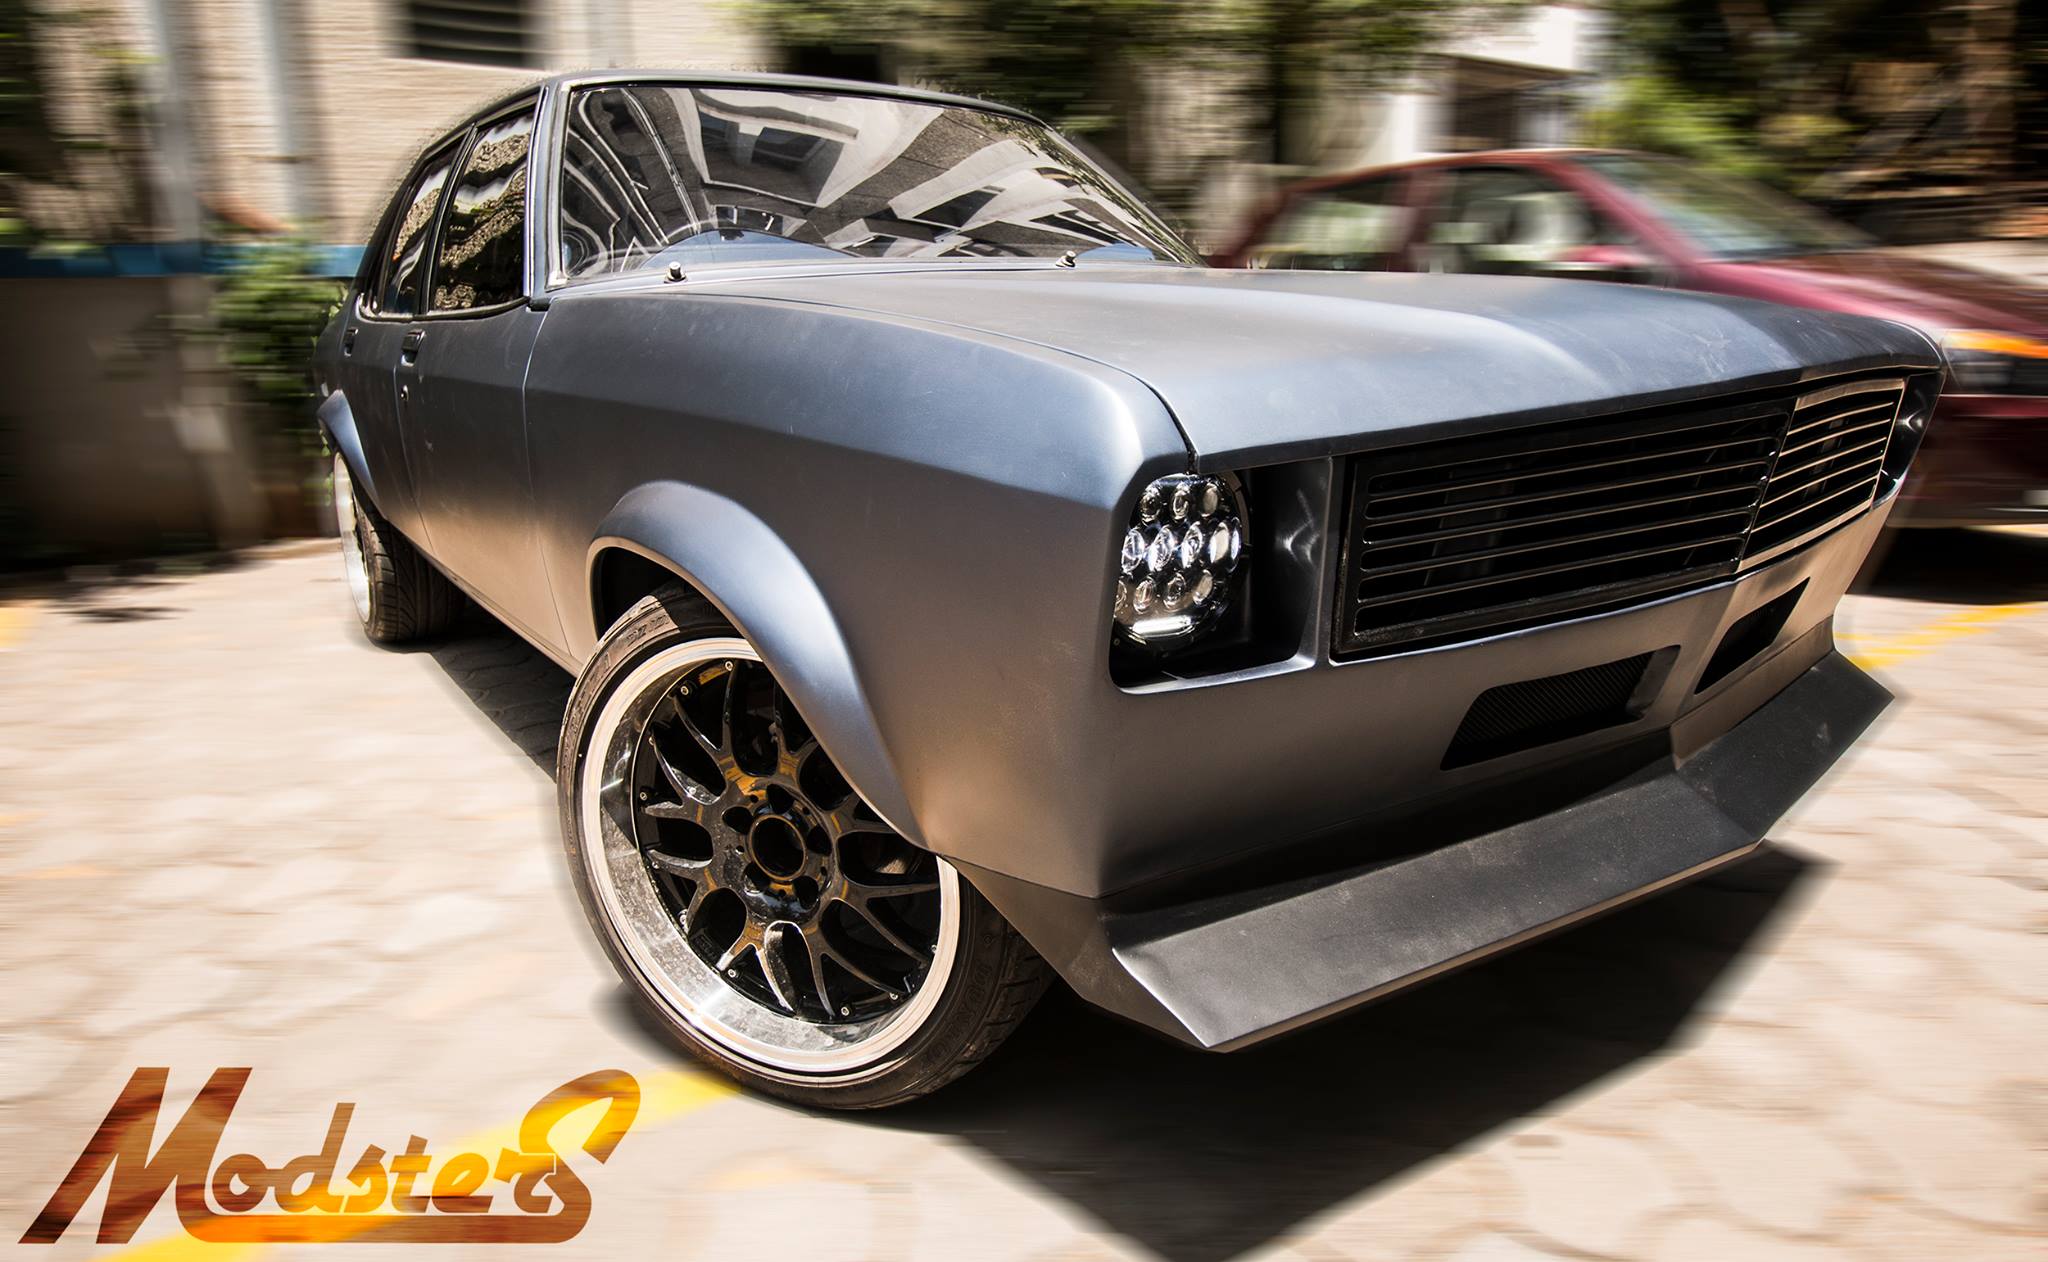 Modified Contessa Car in India with Images and All Details on 